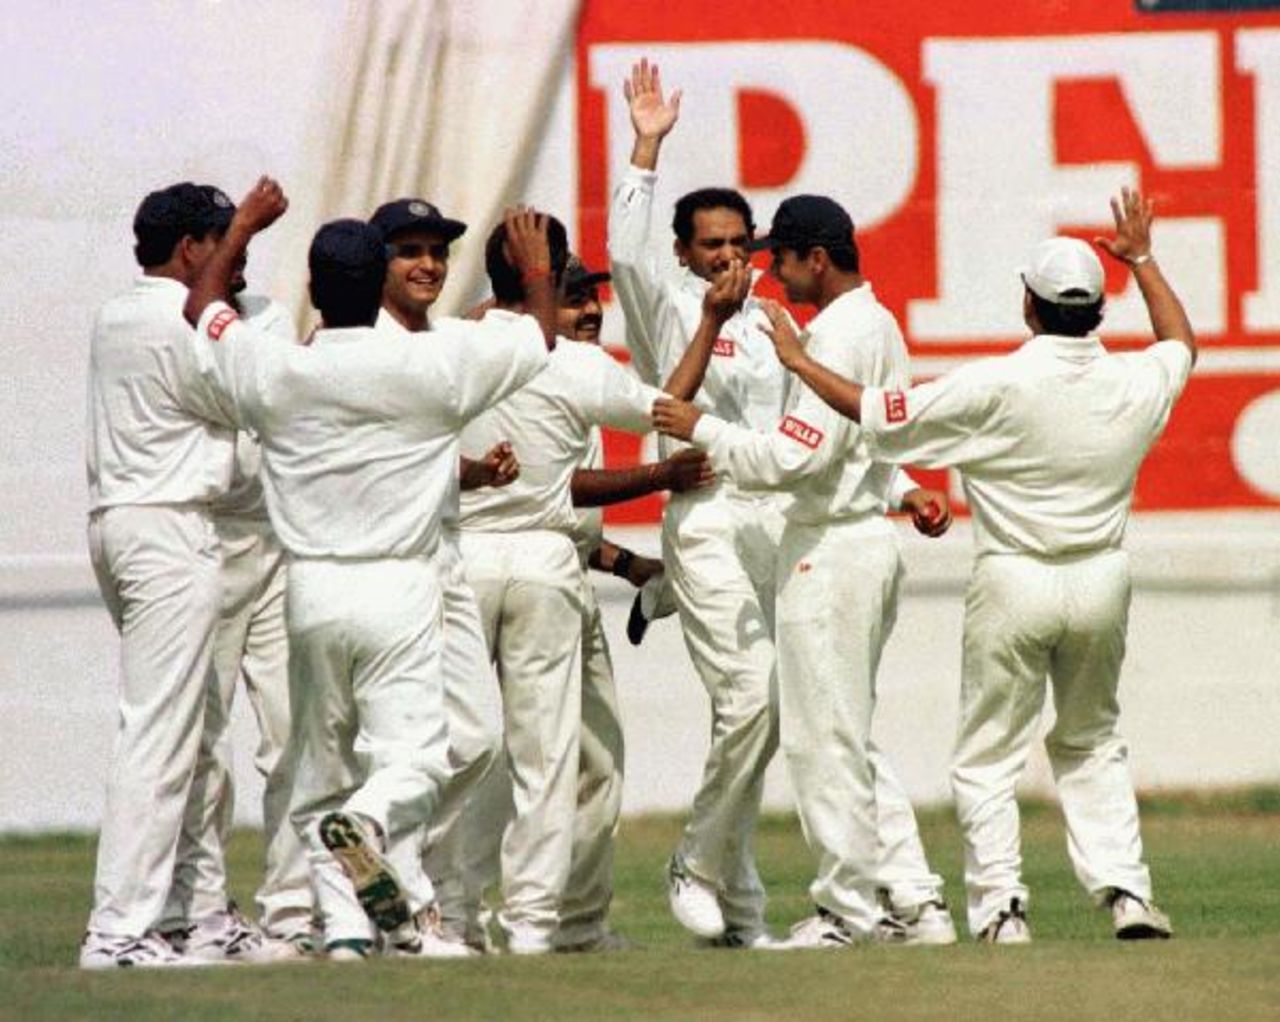 The Indian team celebrates the dismissal of Michael Slater caught by Mohammad Azharuddin off the bowling of David Johnson on day three of the 1996-97 India vs Australia Test at New Delhi